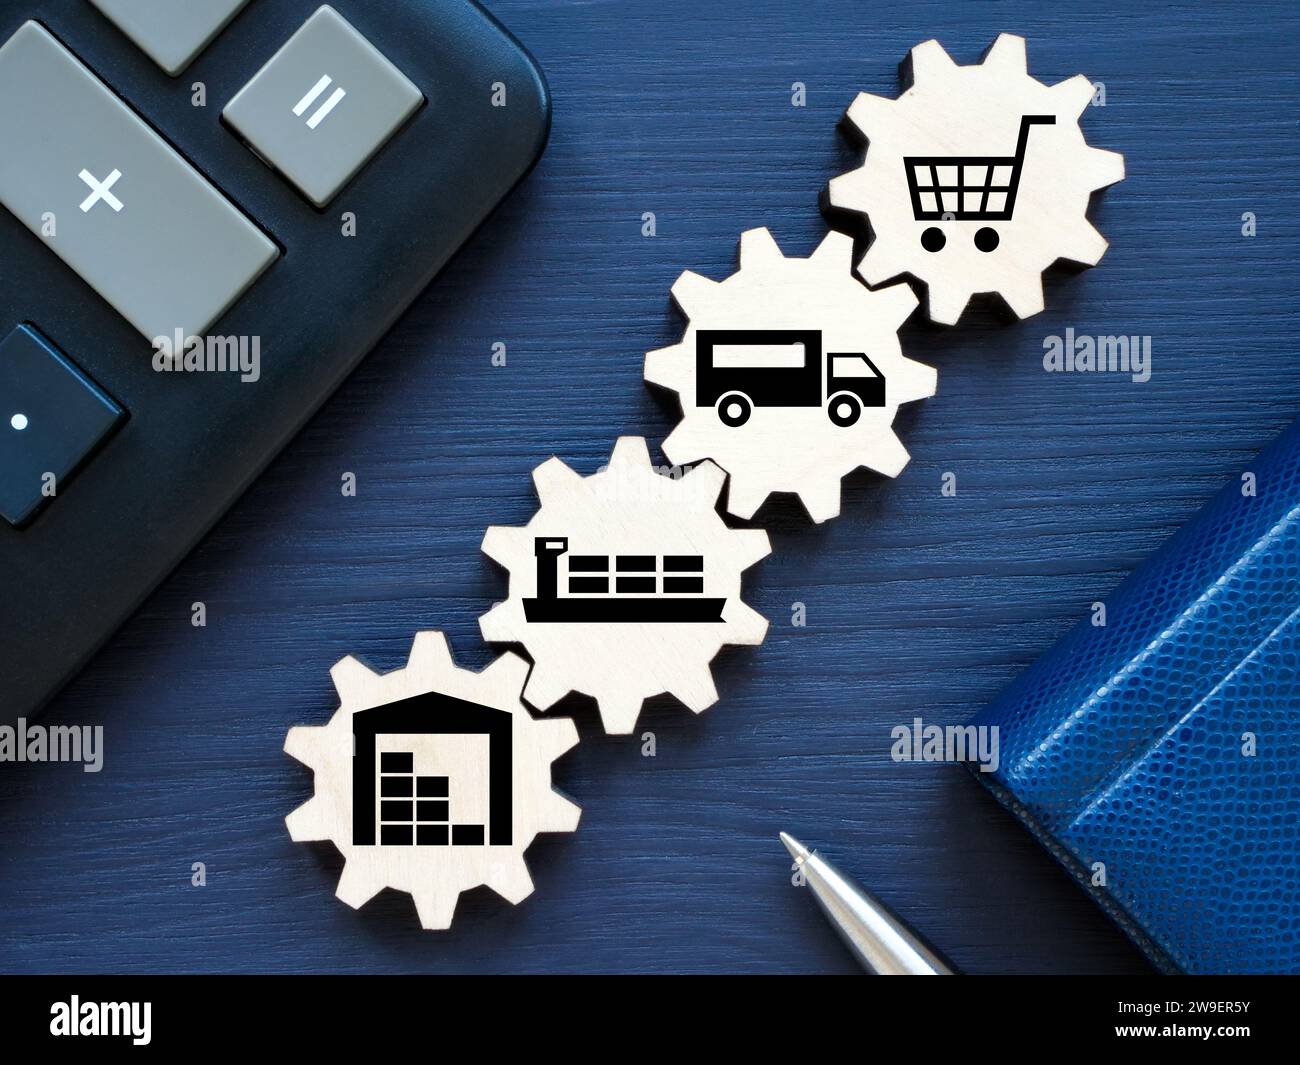 Gears as a product supply chain concept. Stock Photo